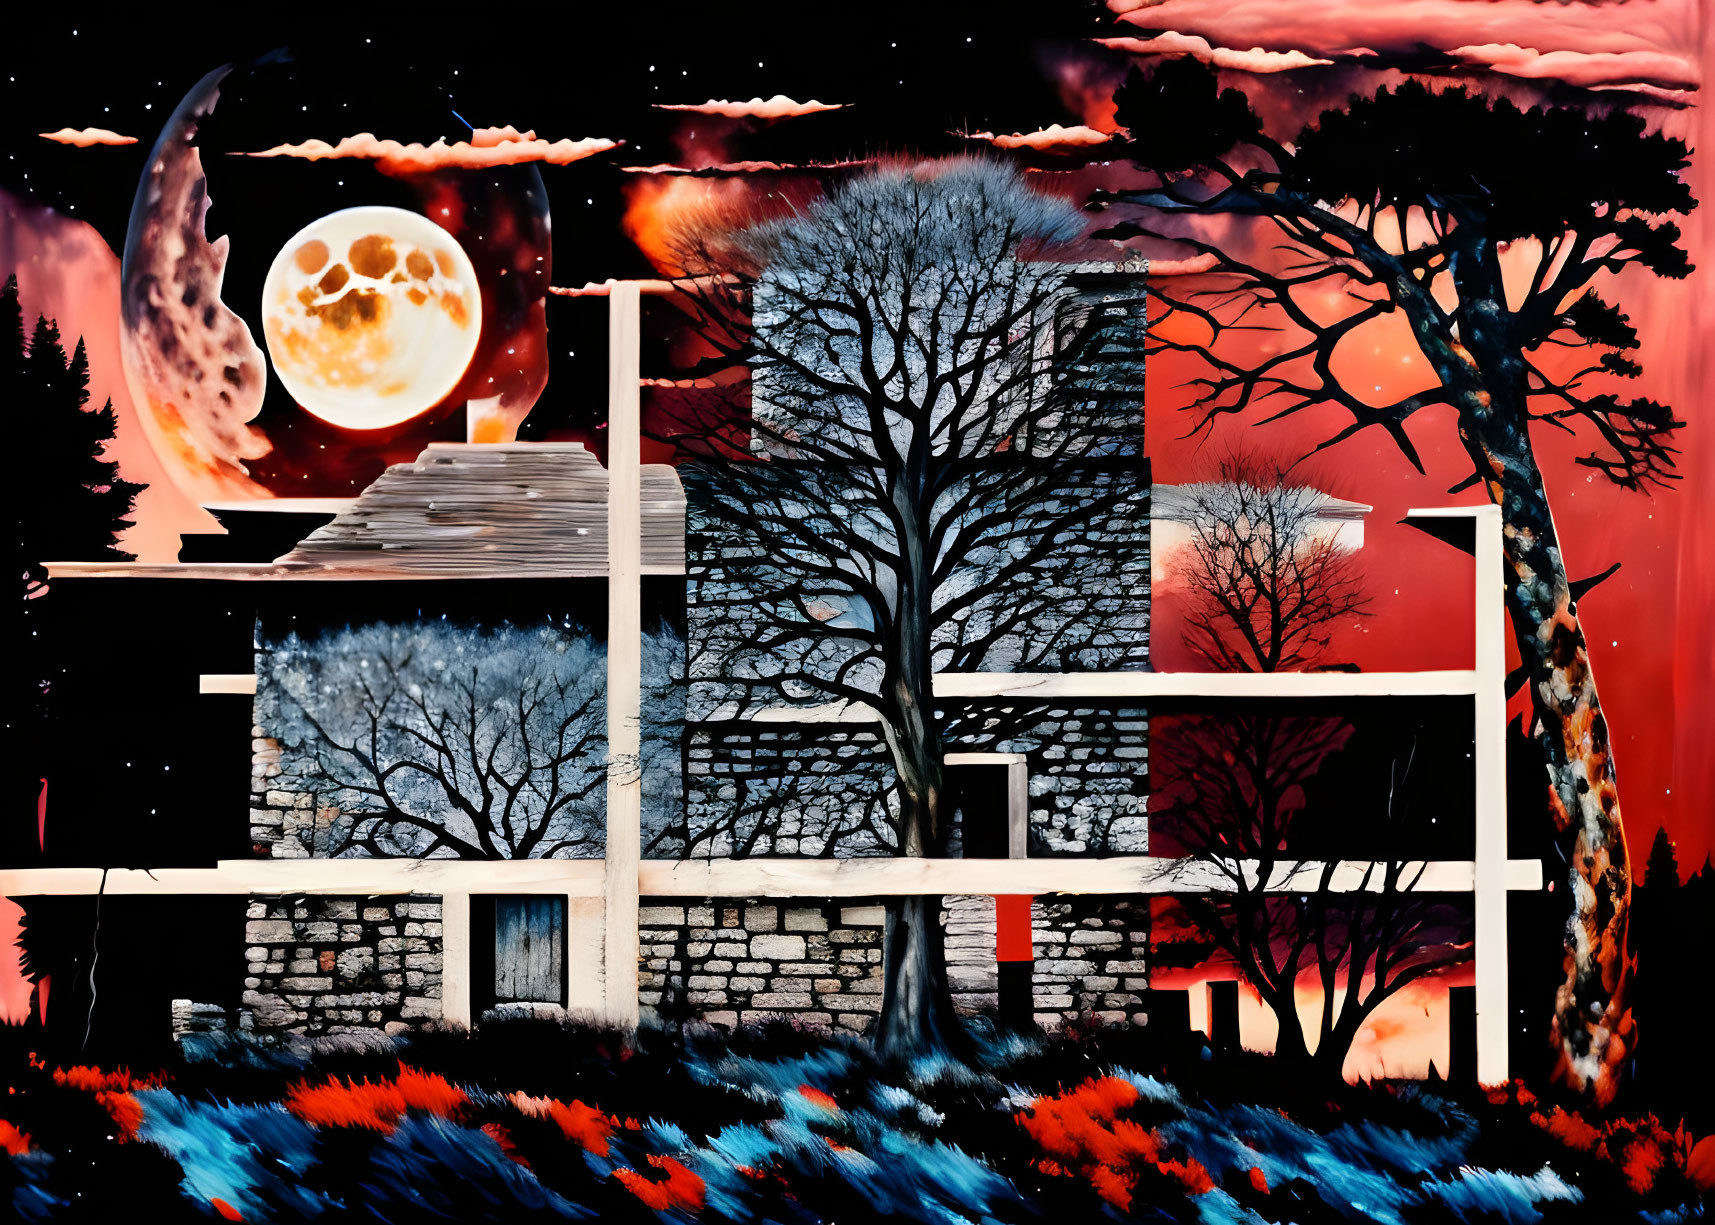 Vivid surreal landscape painting with oranges, blacks, moon, trees, and architectural elements